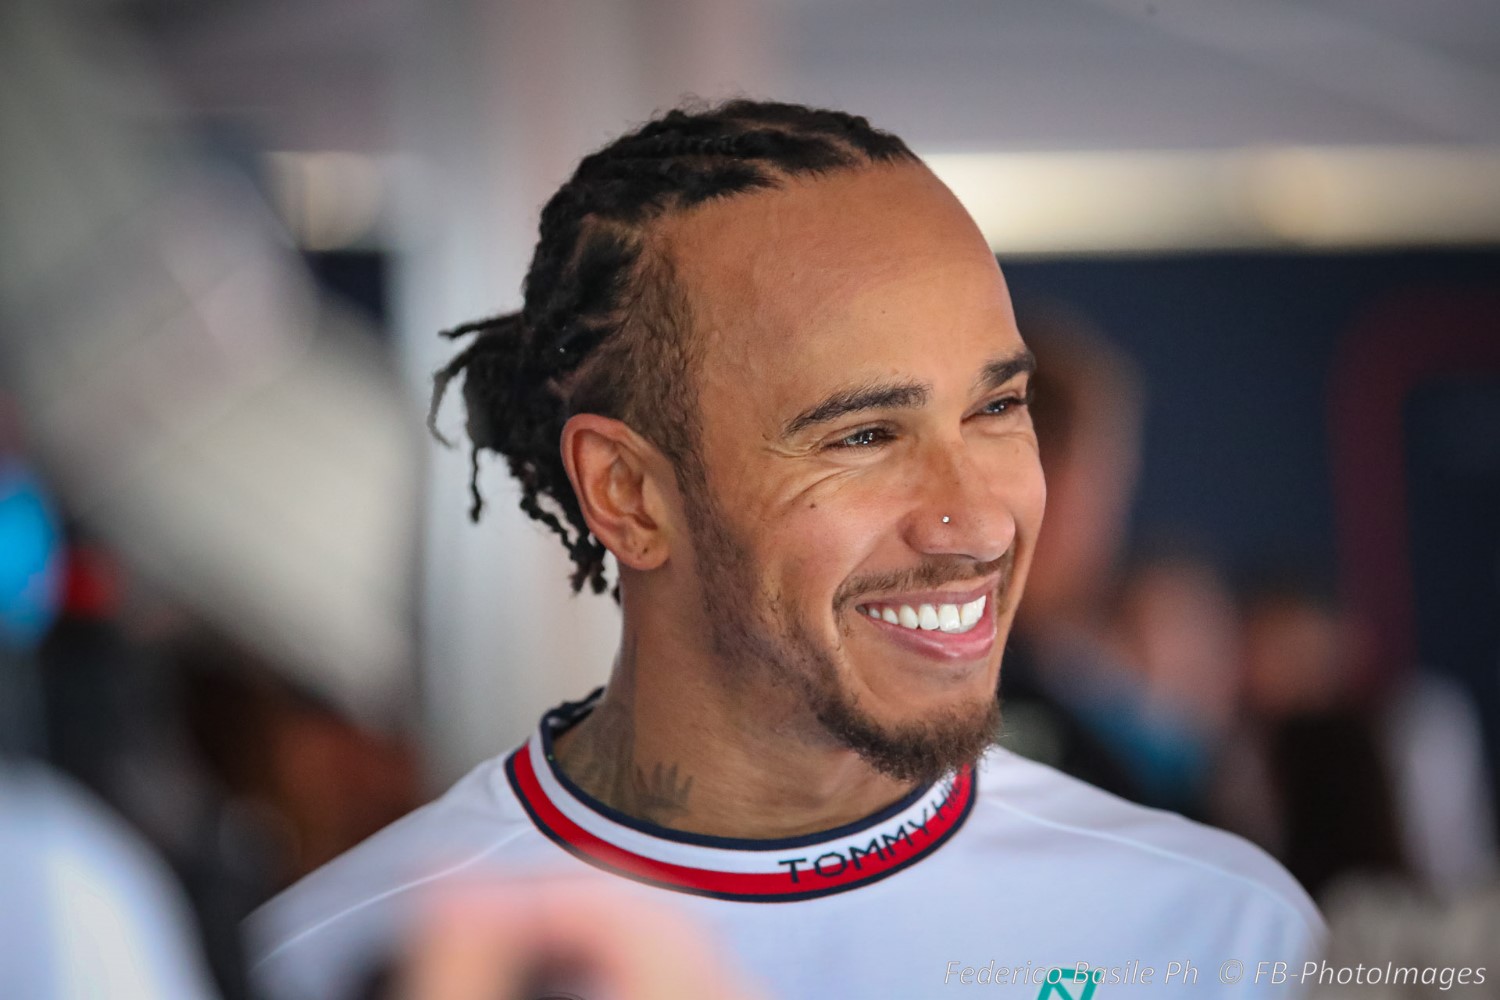 #44 Lewis Hamilton, (GRB) AMG Mercedes Ineos during the Austrian GP, Spielberg 29 June-2 July 2023 at the RedBull Ring, Formula 1 World championship 2023.